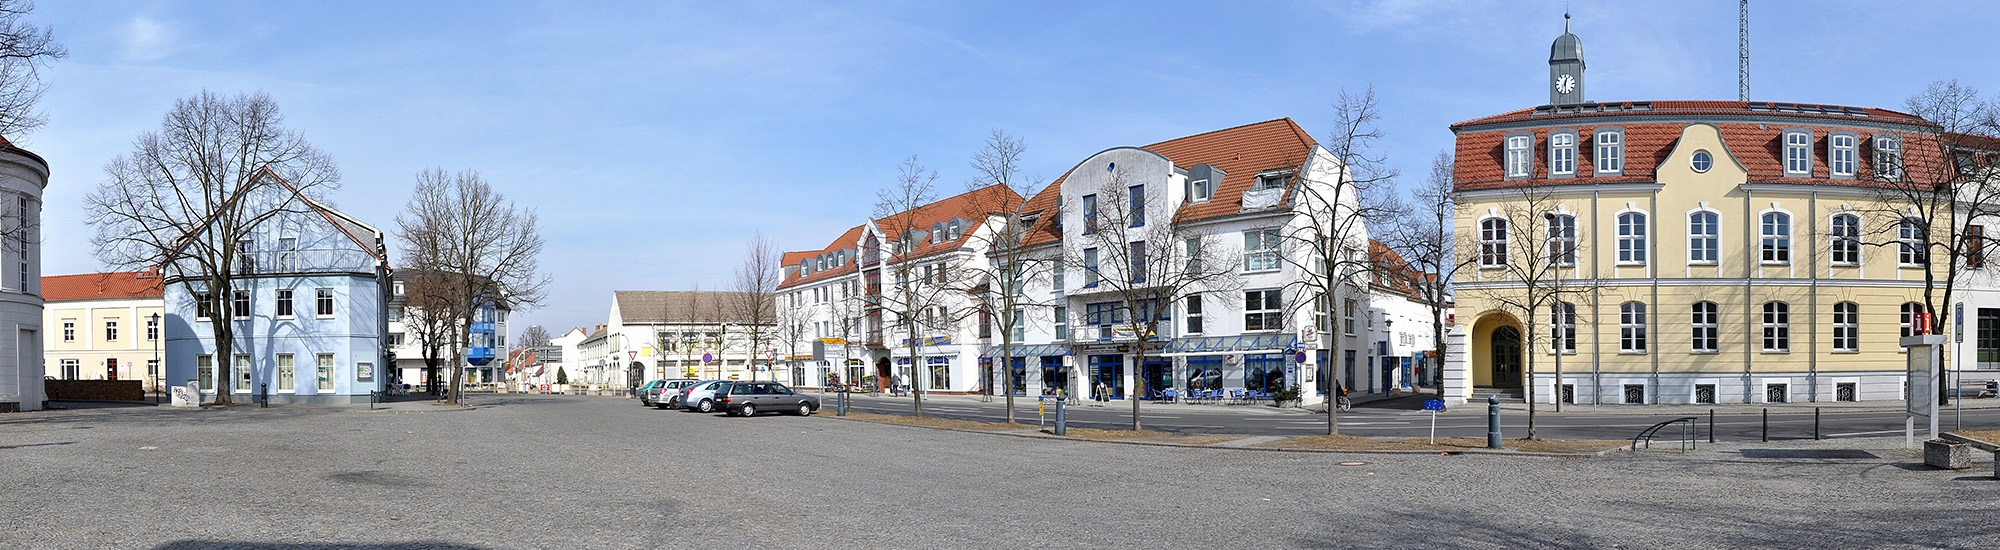 Immobilien Seelow